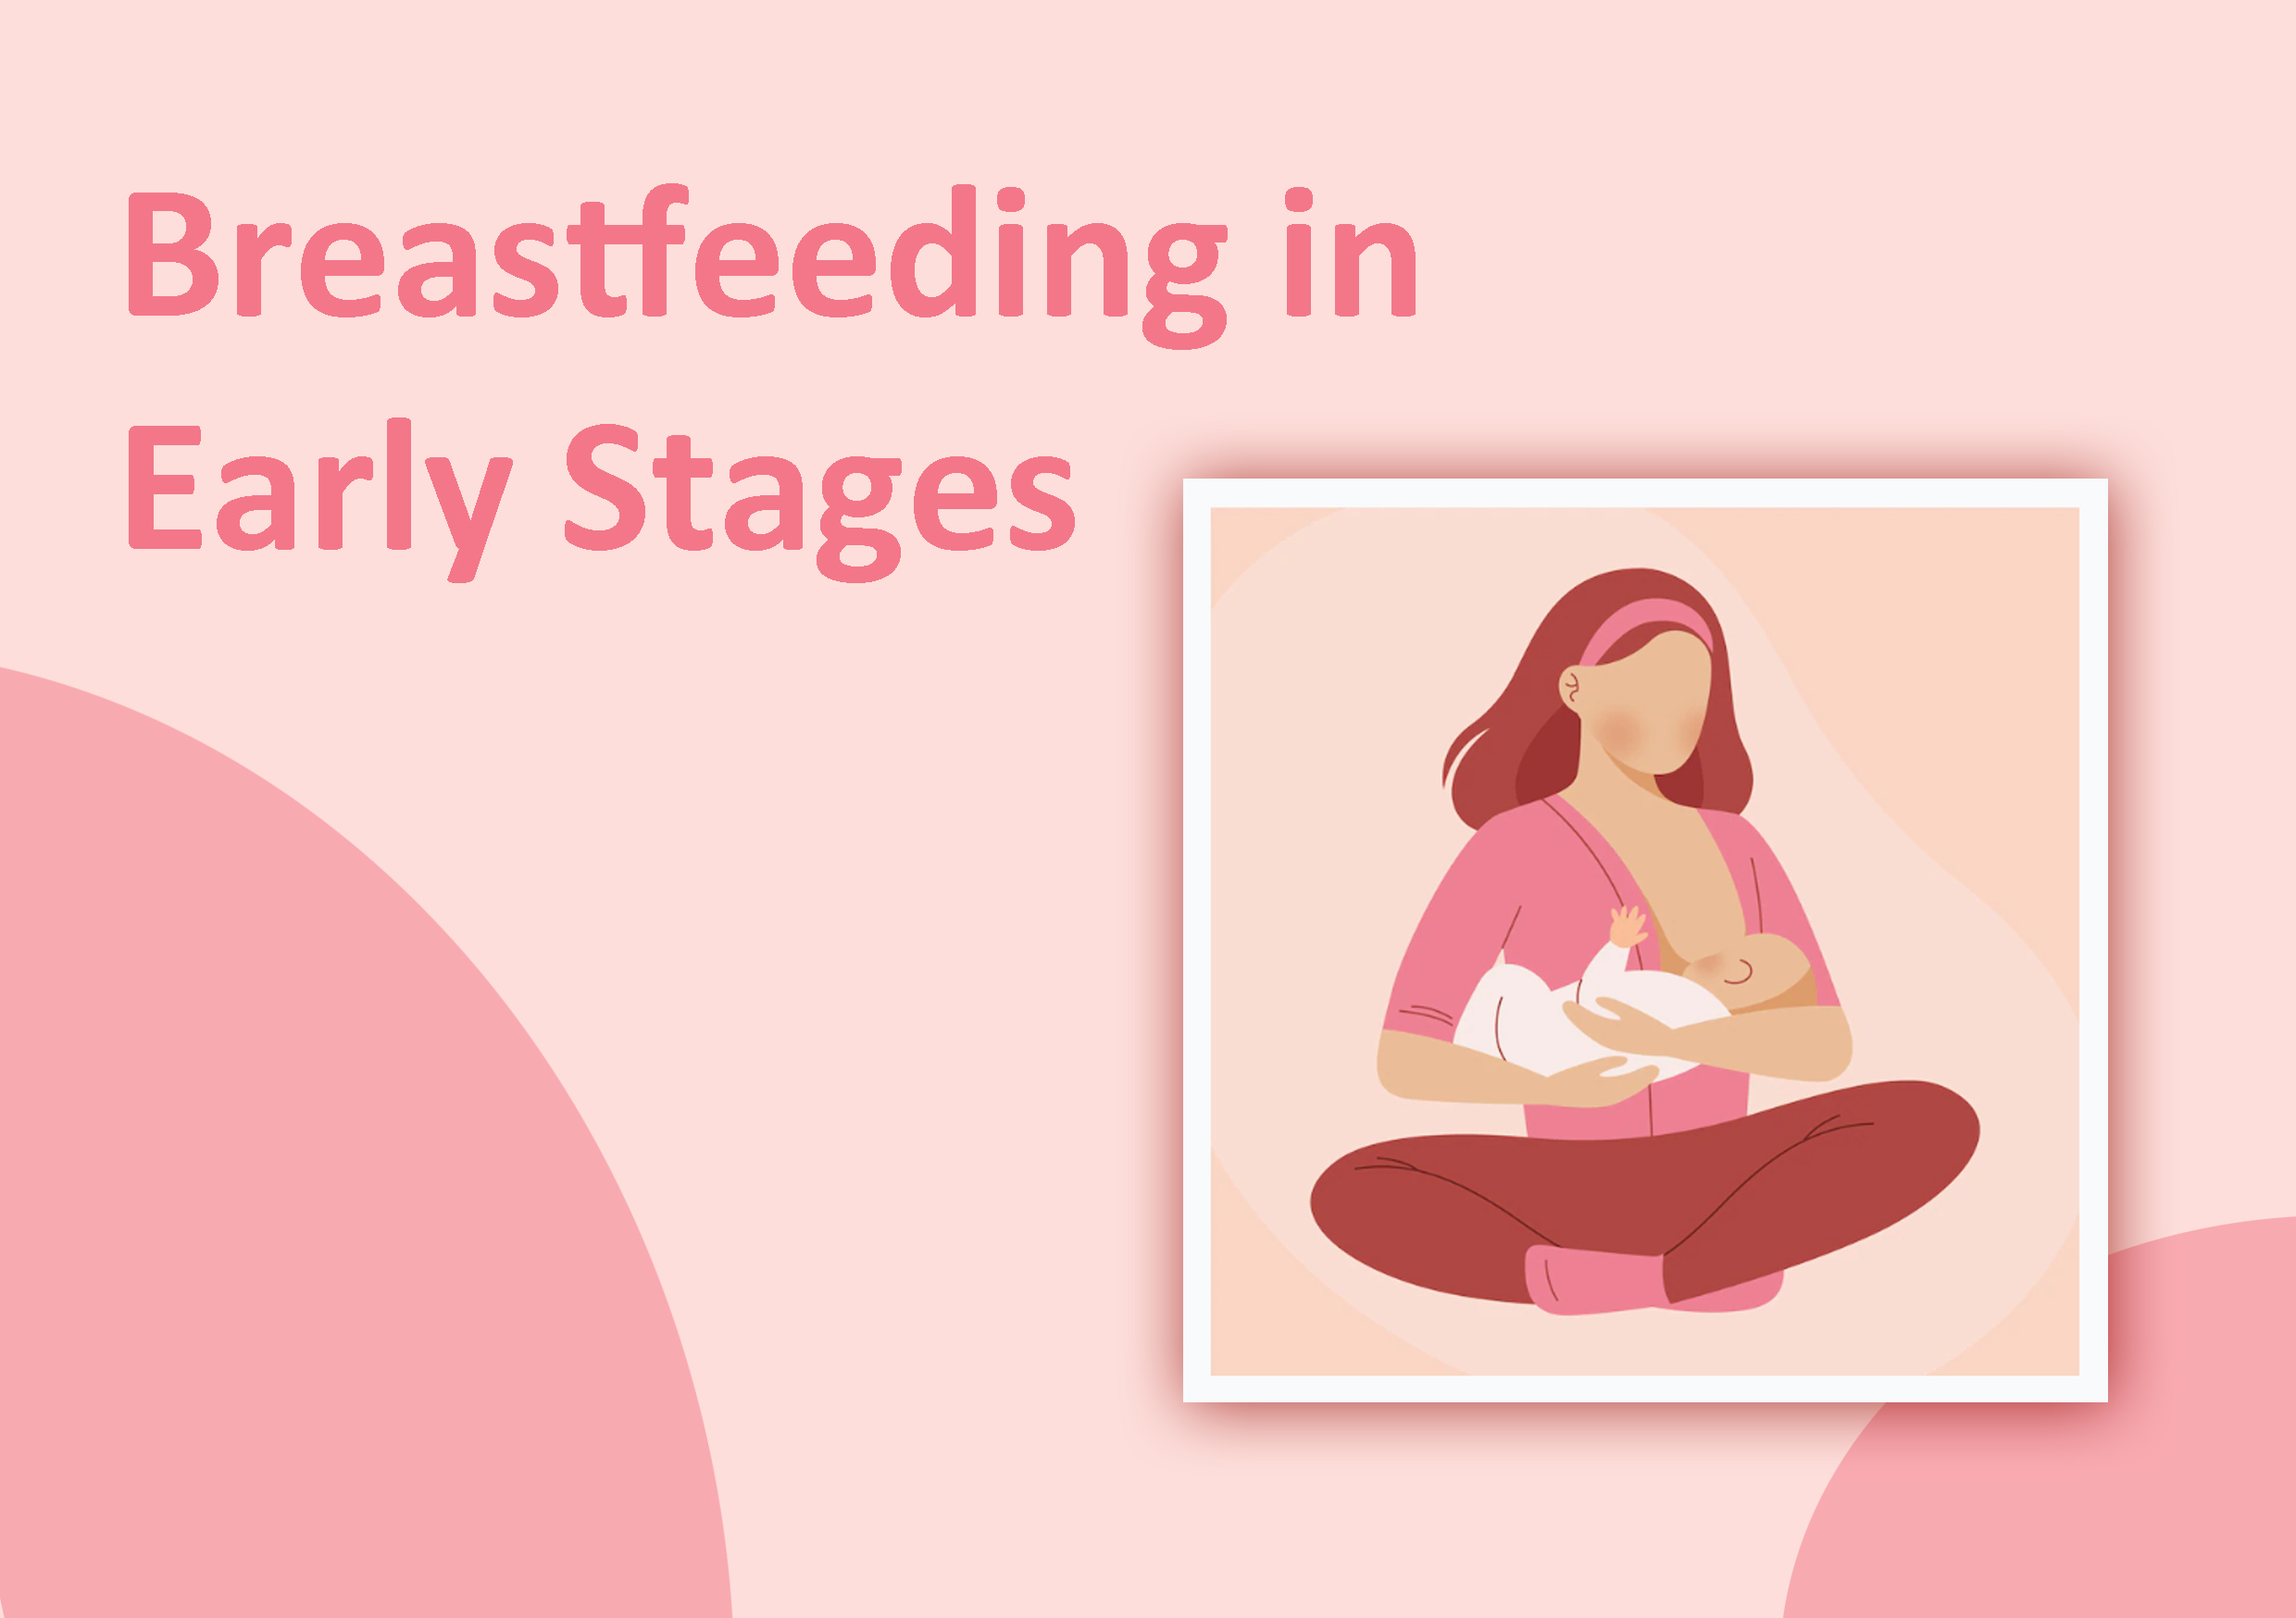 Breastfeeding in Early Stages